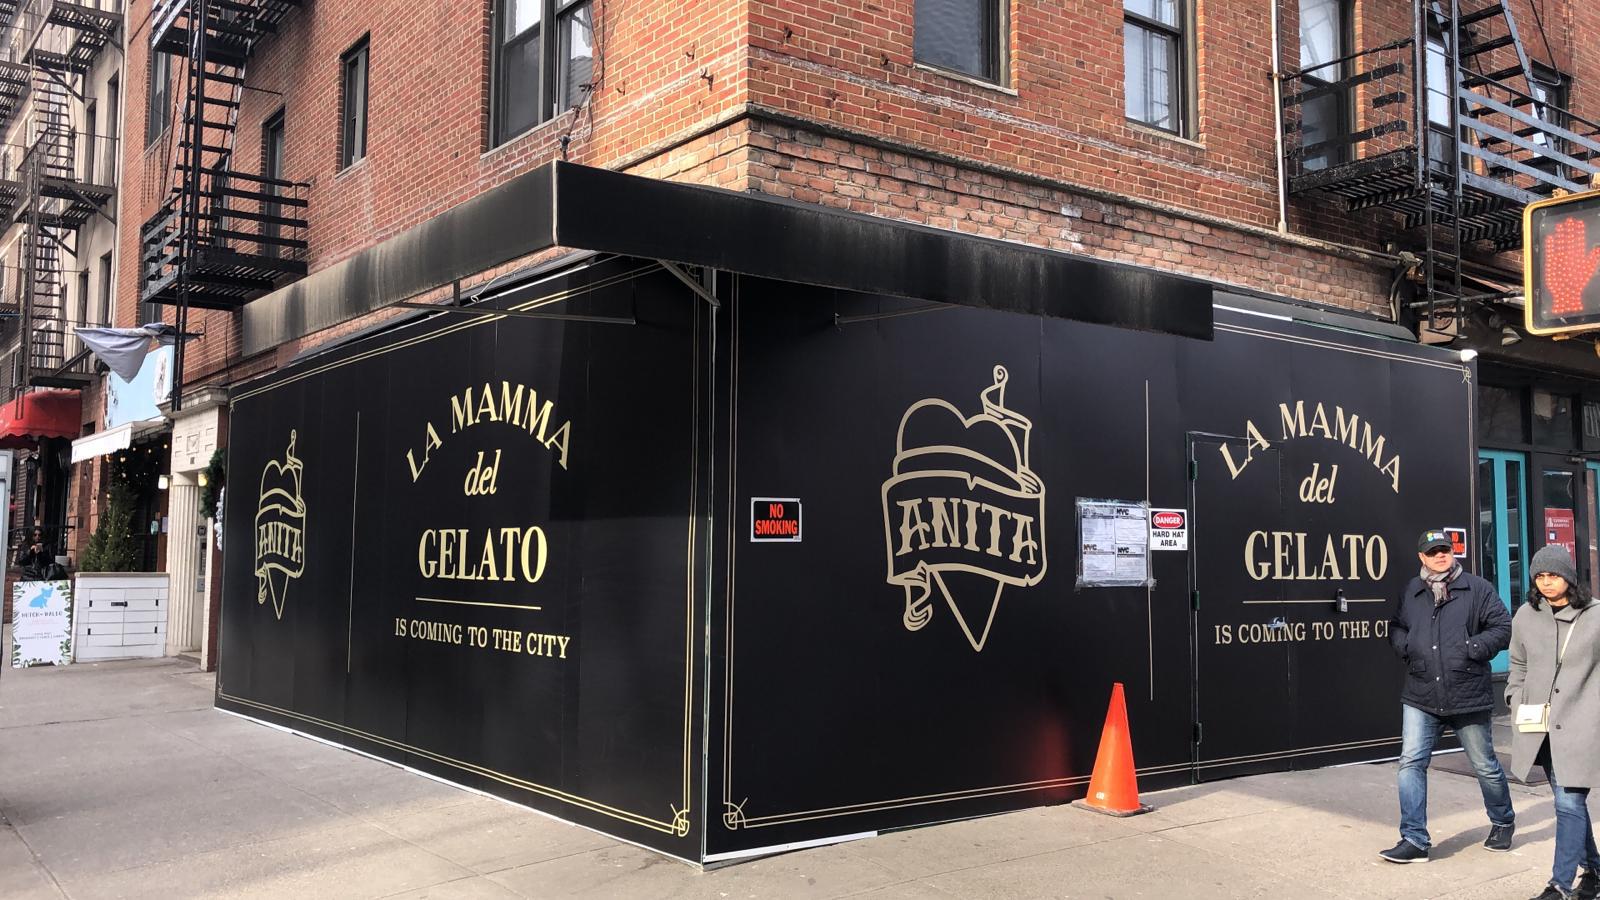 Anita Gelato will open on the corner of Second Avenue and East 81st Street this spring